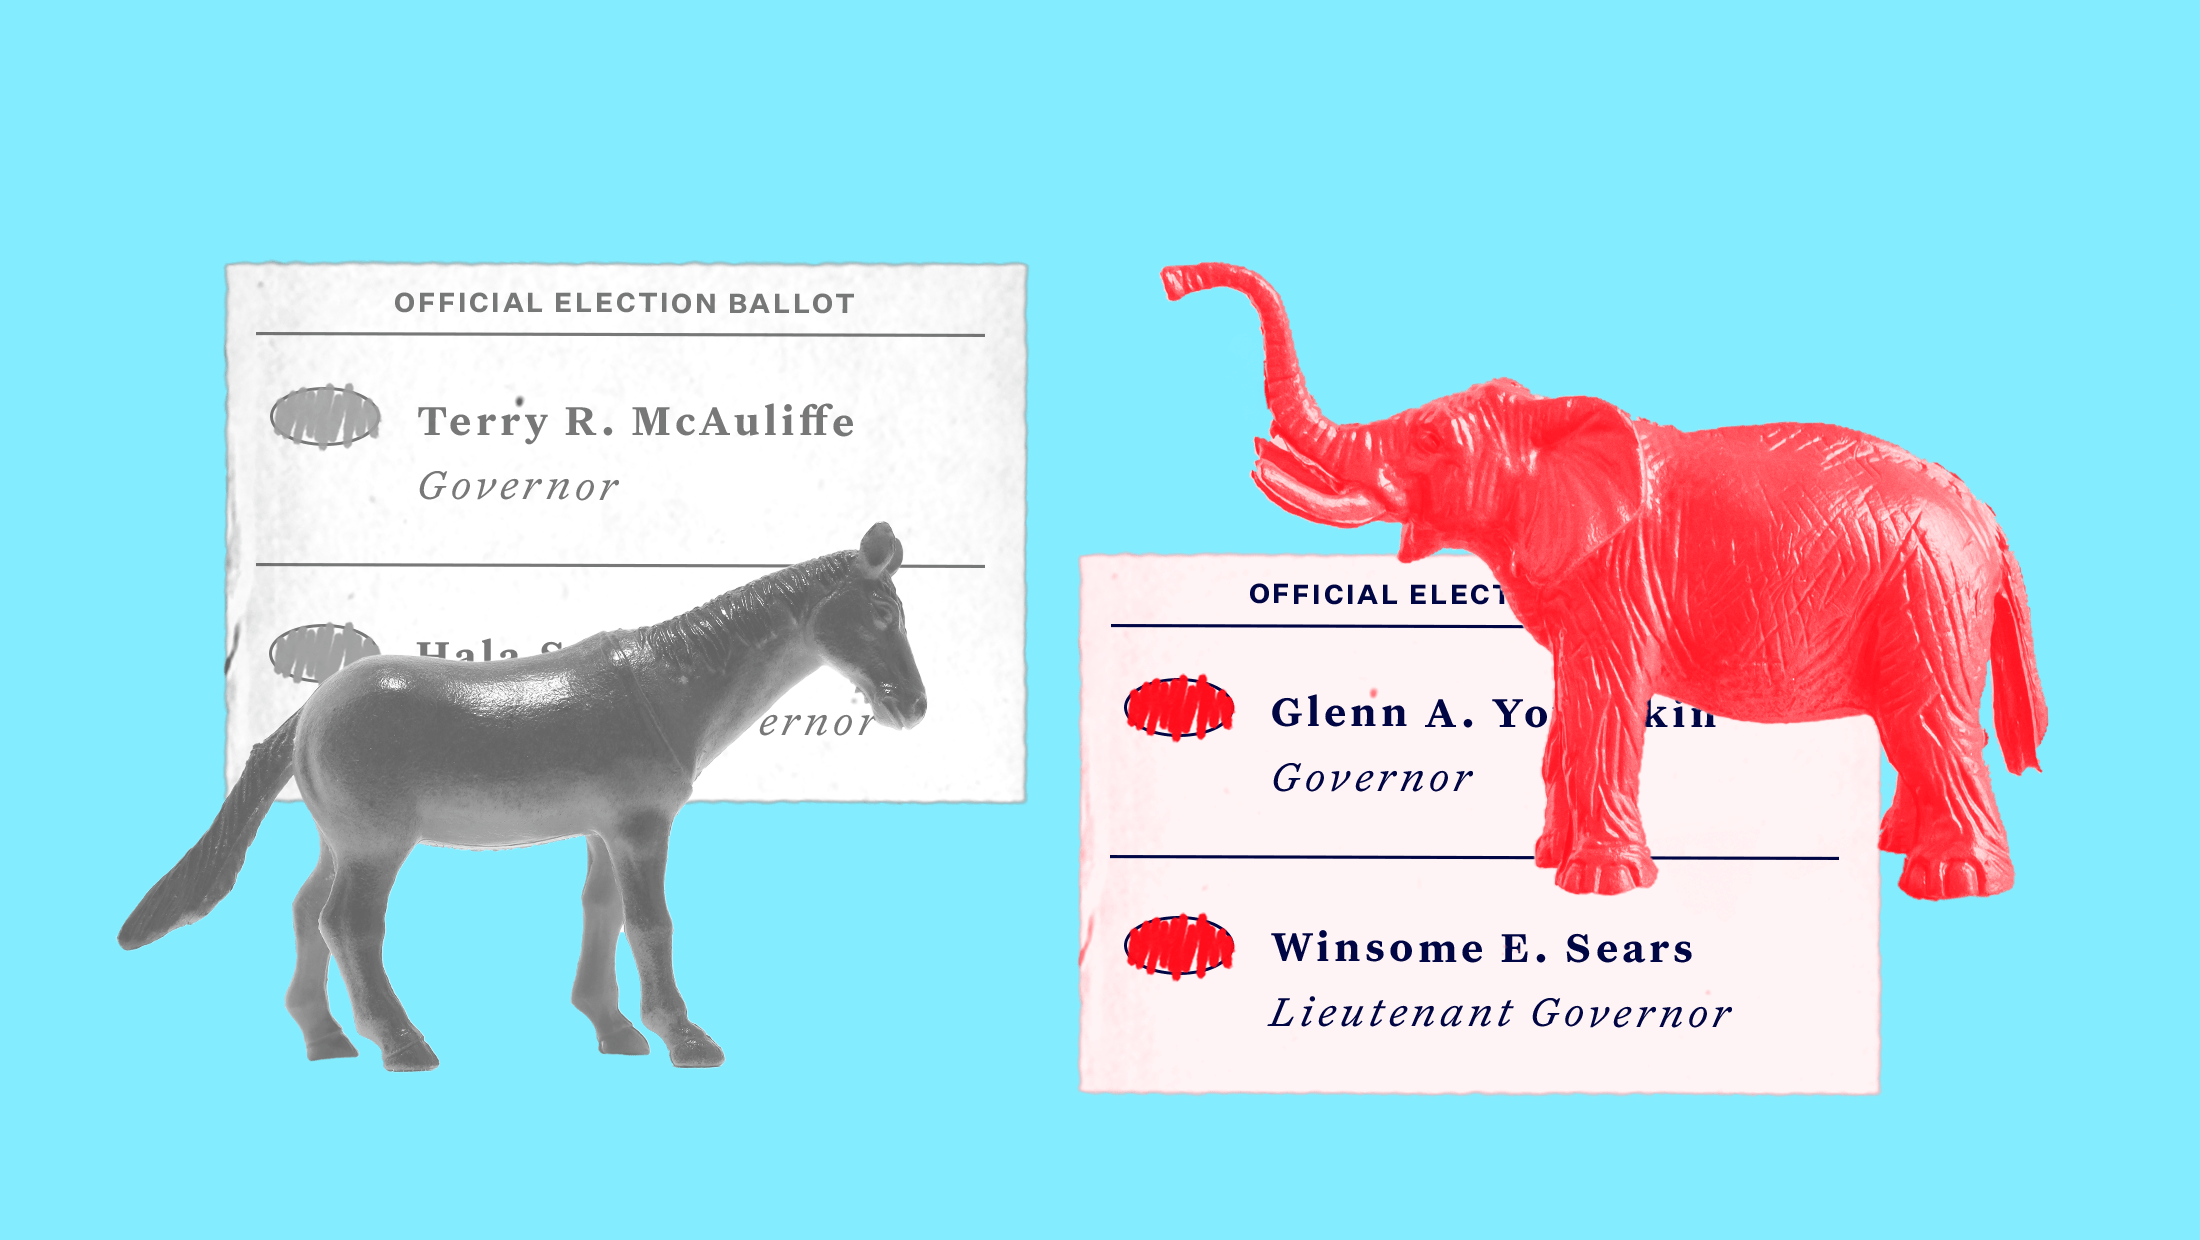 A defeated donkey accompanied by a ballot that says "OFFICIAL ELECTION BALLOT TERRY R. MCAULIFFE GOVERNOR and HALA S. AYALA LIEUTENANT GOVERNOR" and a red-tinted elephant accompanied by a ballot that says "OFFICIAL ELECTION BALLOT GLENN A. YOUNGKIN GOVERNOR and WINSOME E. SEARS LIEUTENANT GOVERNOR"